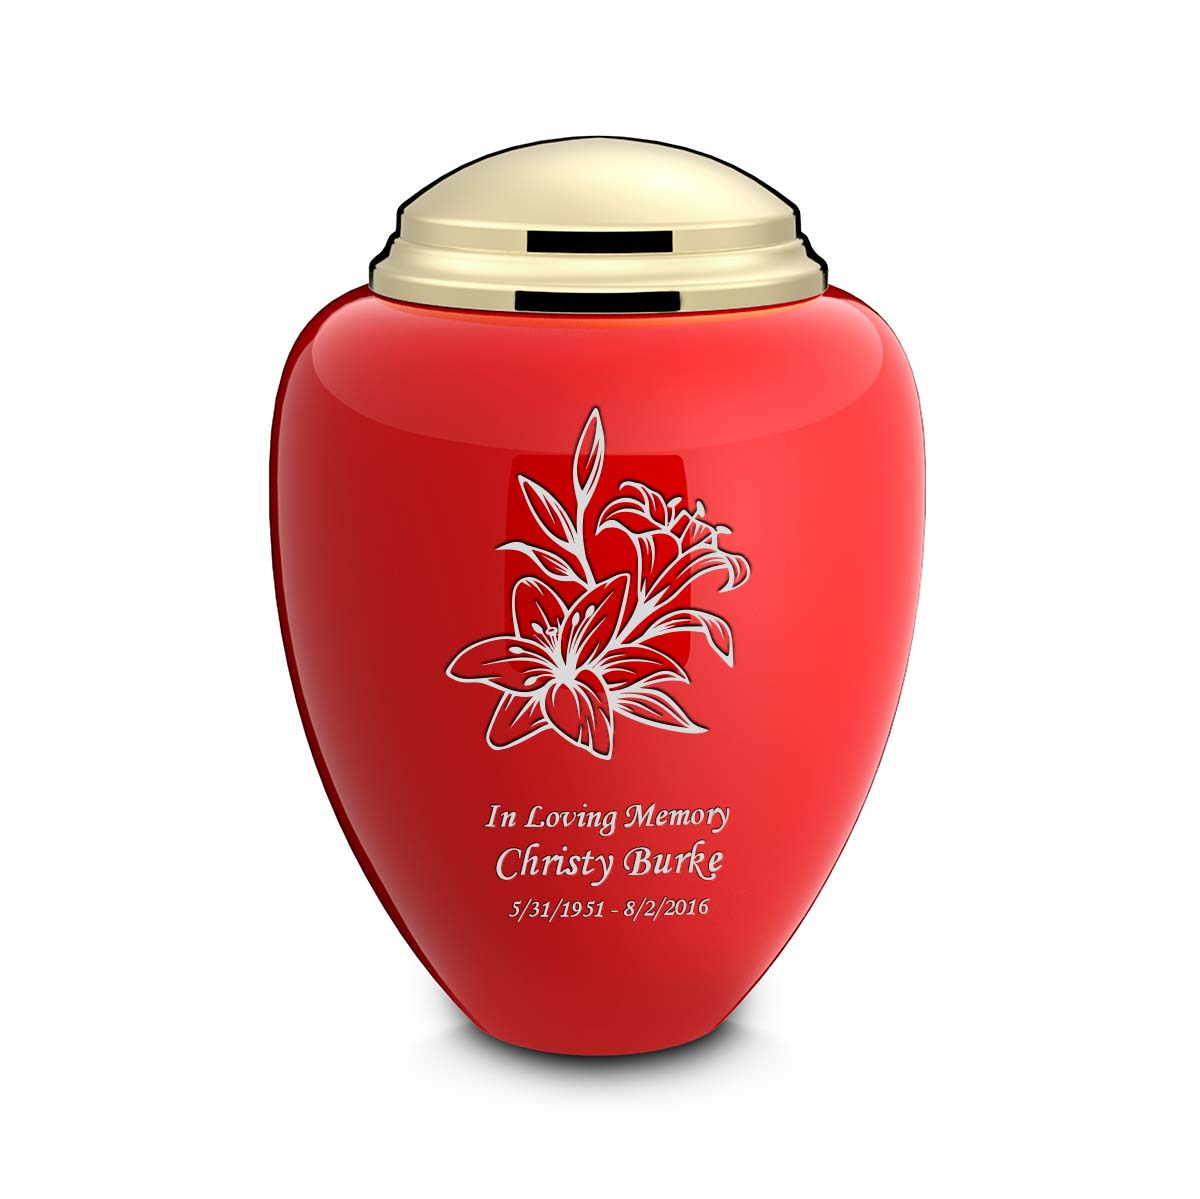 Adult Tribute Red & Shiny Brass Lily Cremation Urn